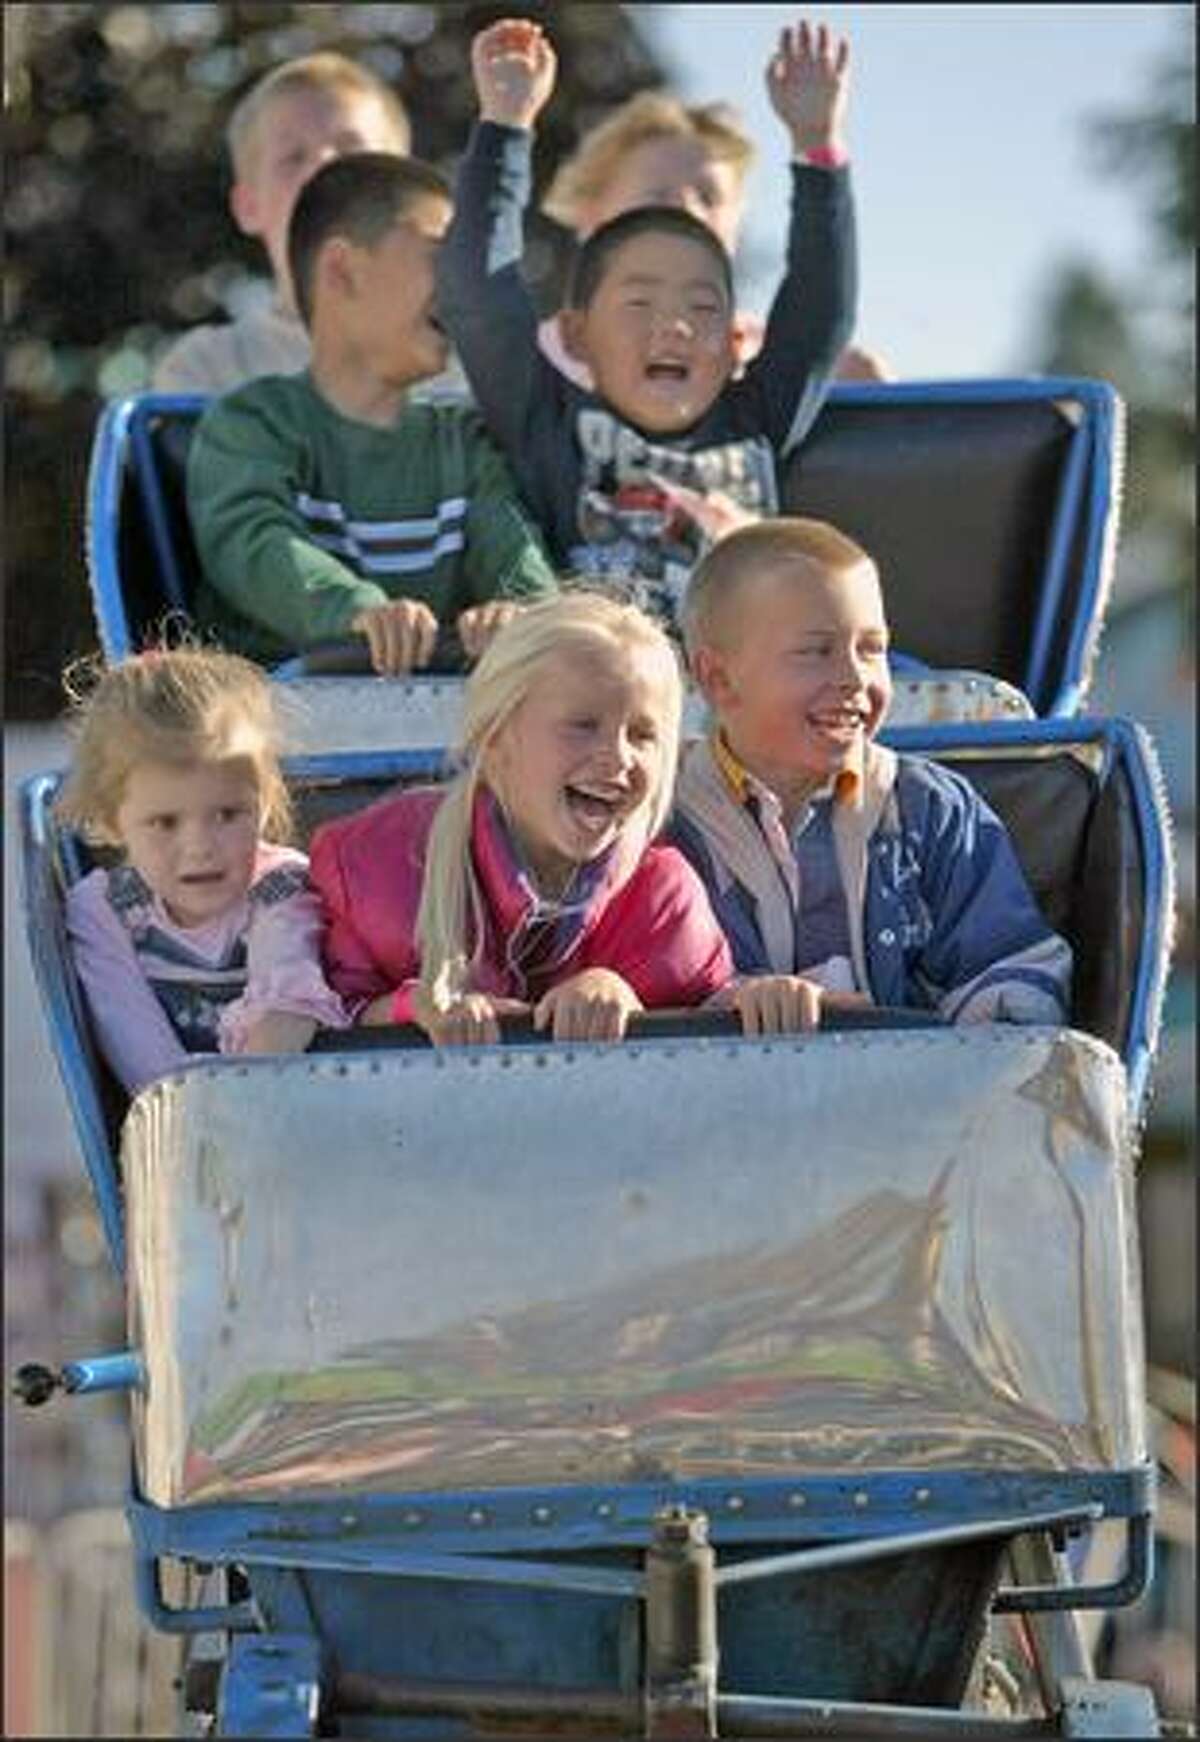 From left, Luccia Buck, 3, Abby Leaman 5, and Noah Leaman, 6, ride the little people's roller coaster at the Puyallup Fair earlier this week.